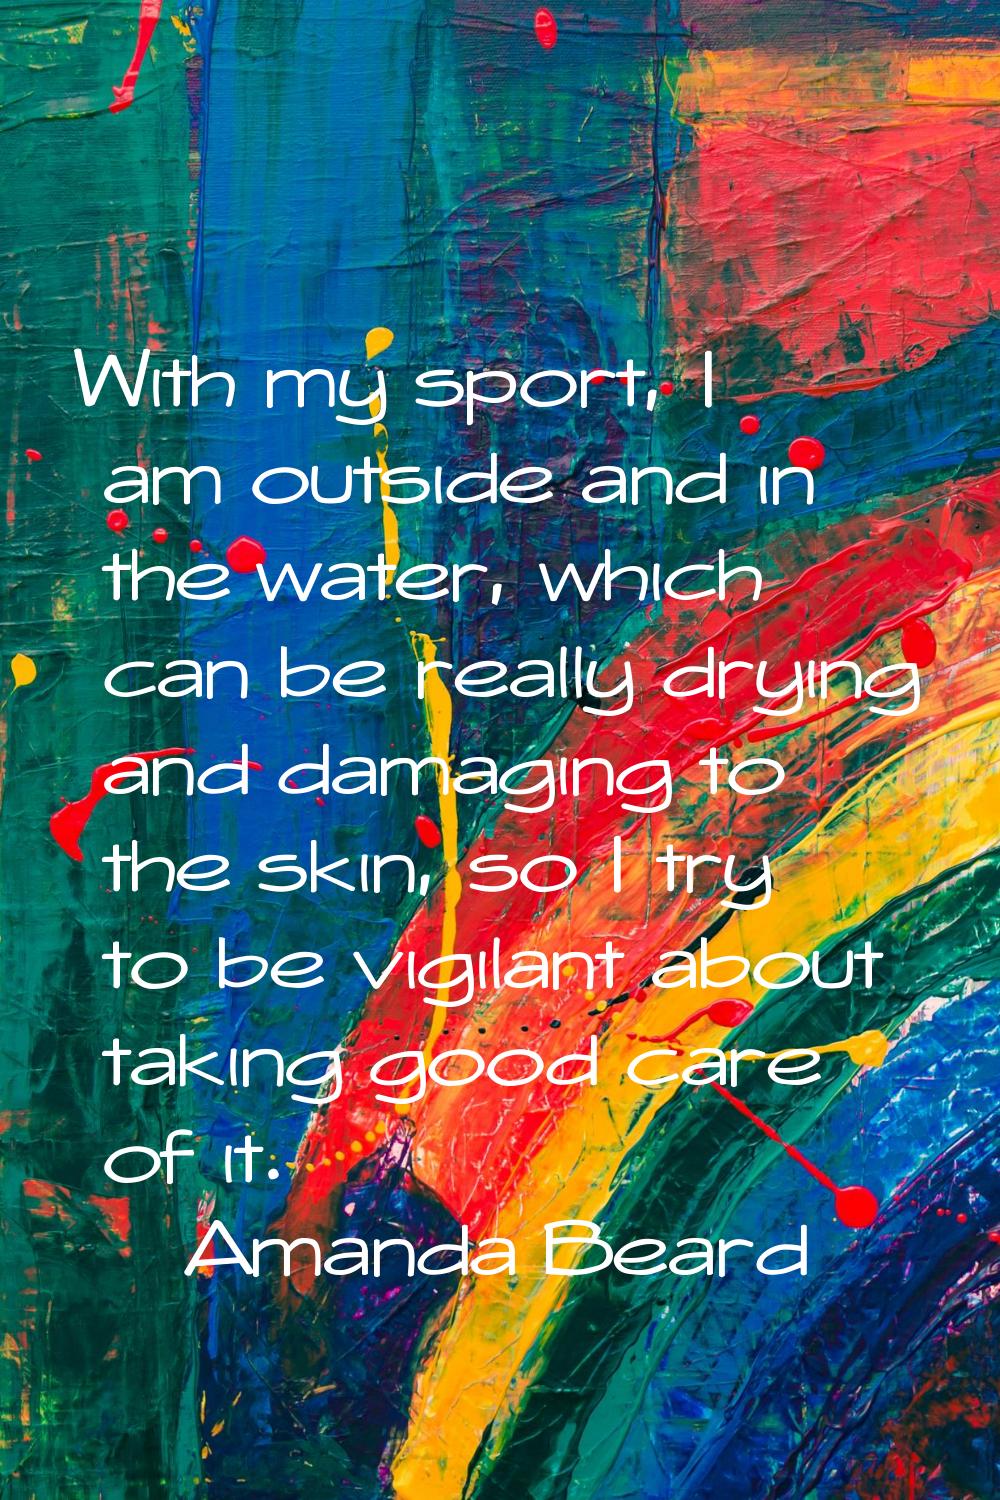 With my sport, I am outside and in the water, which can be really drying and damaging to the skin, 